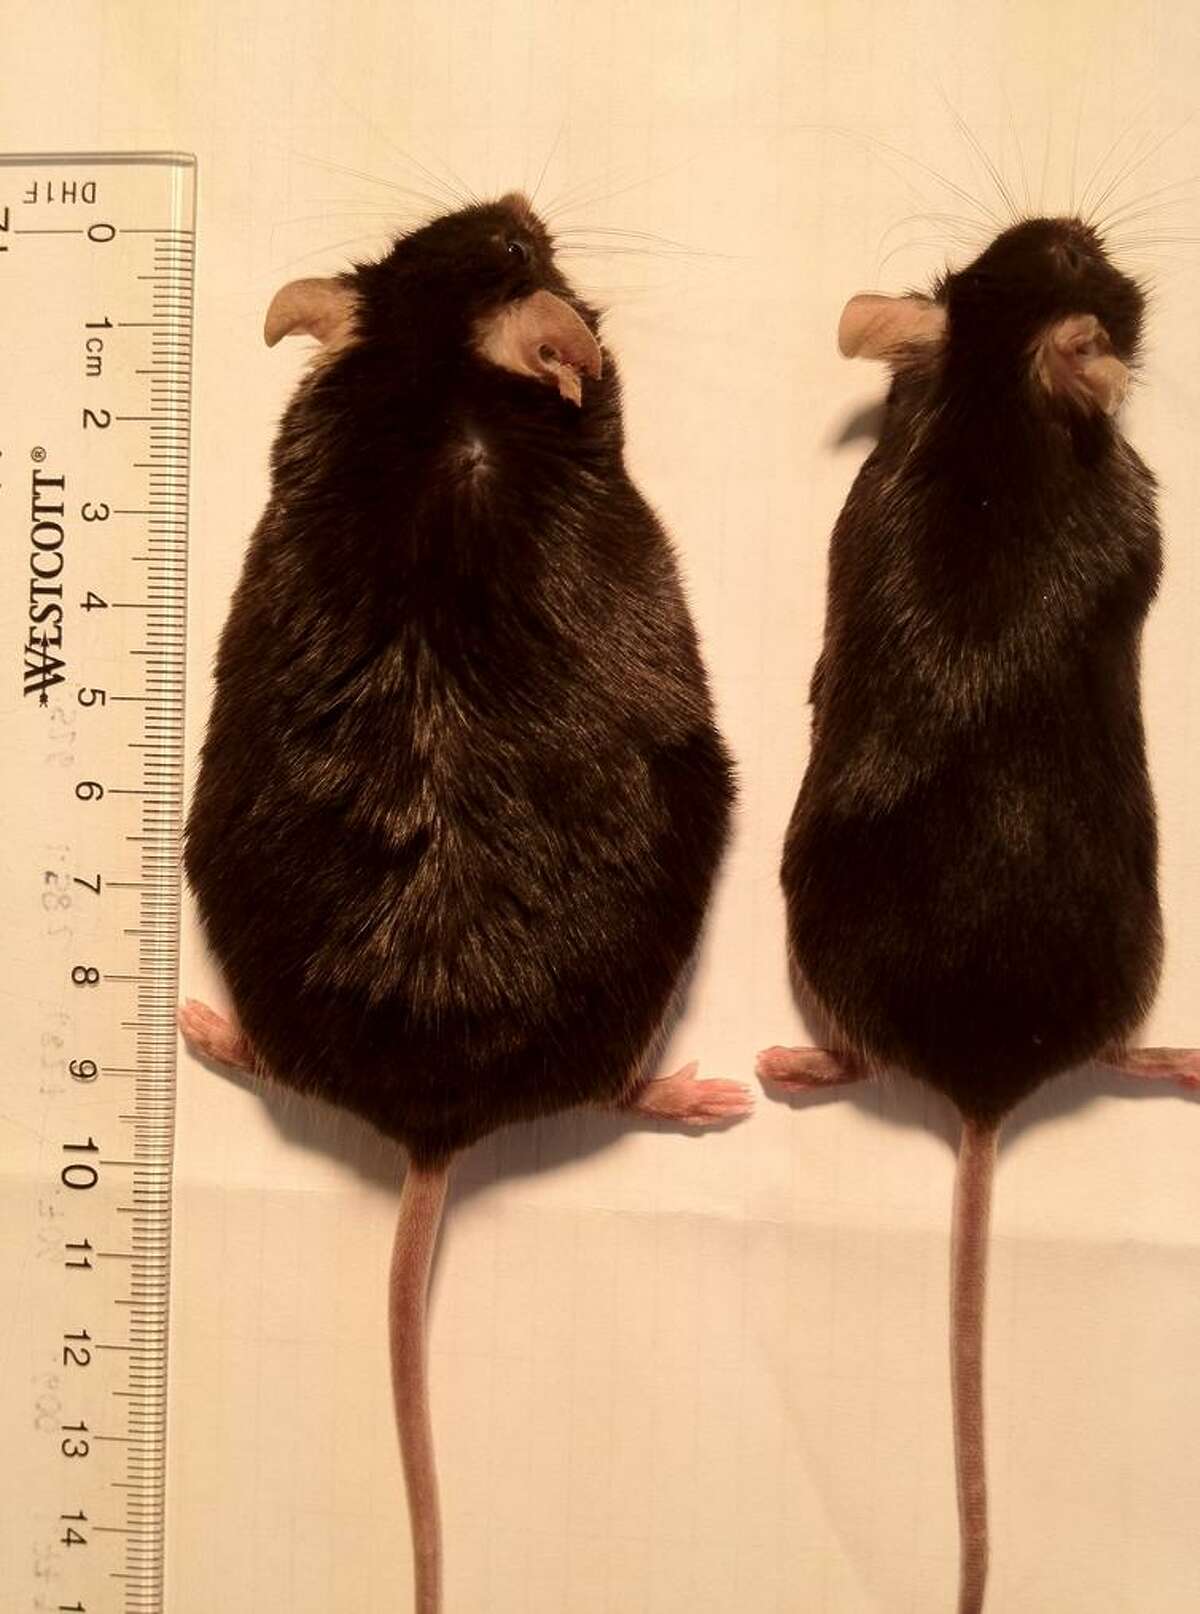 These mice ate the same high-fat diet in a UC Berkeley study, but the sense of smell was removed for the one on the right, helping it stay slim.